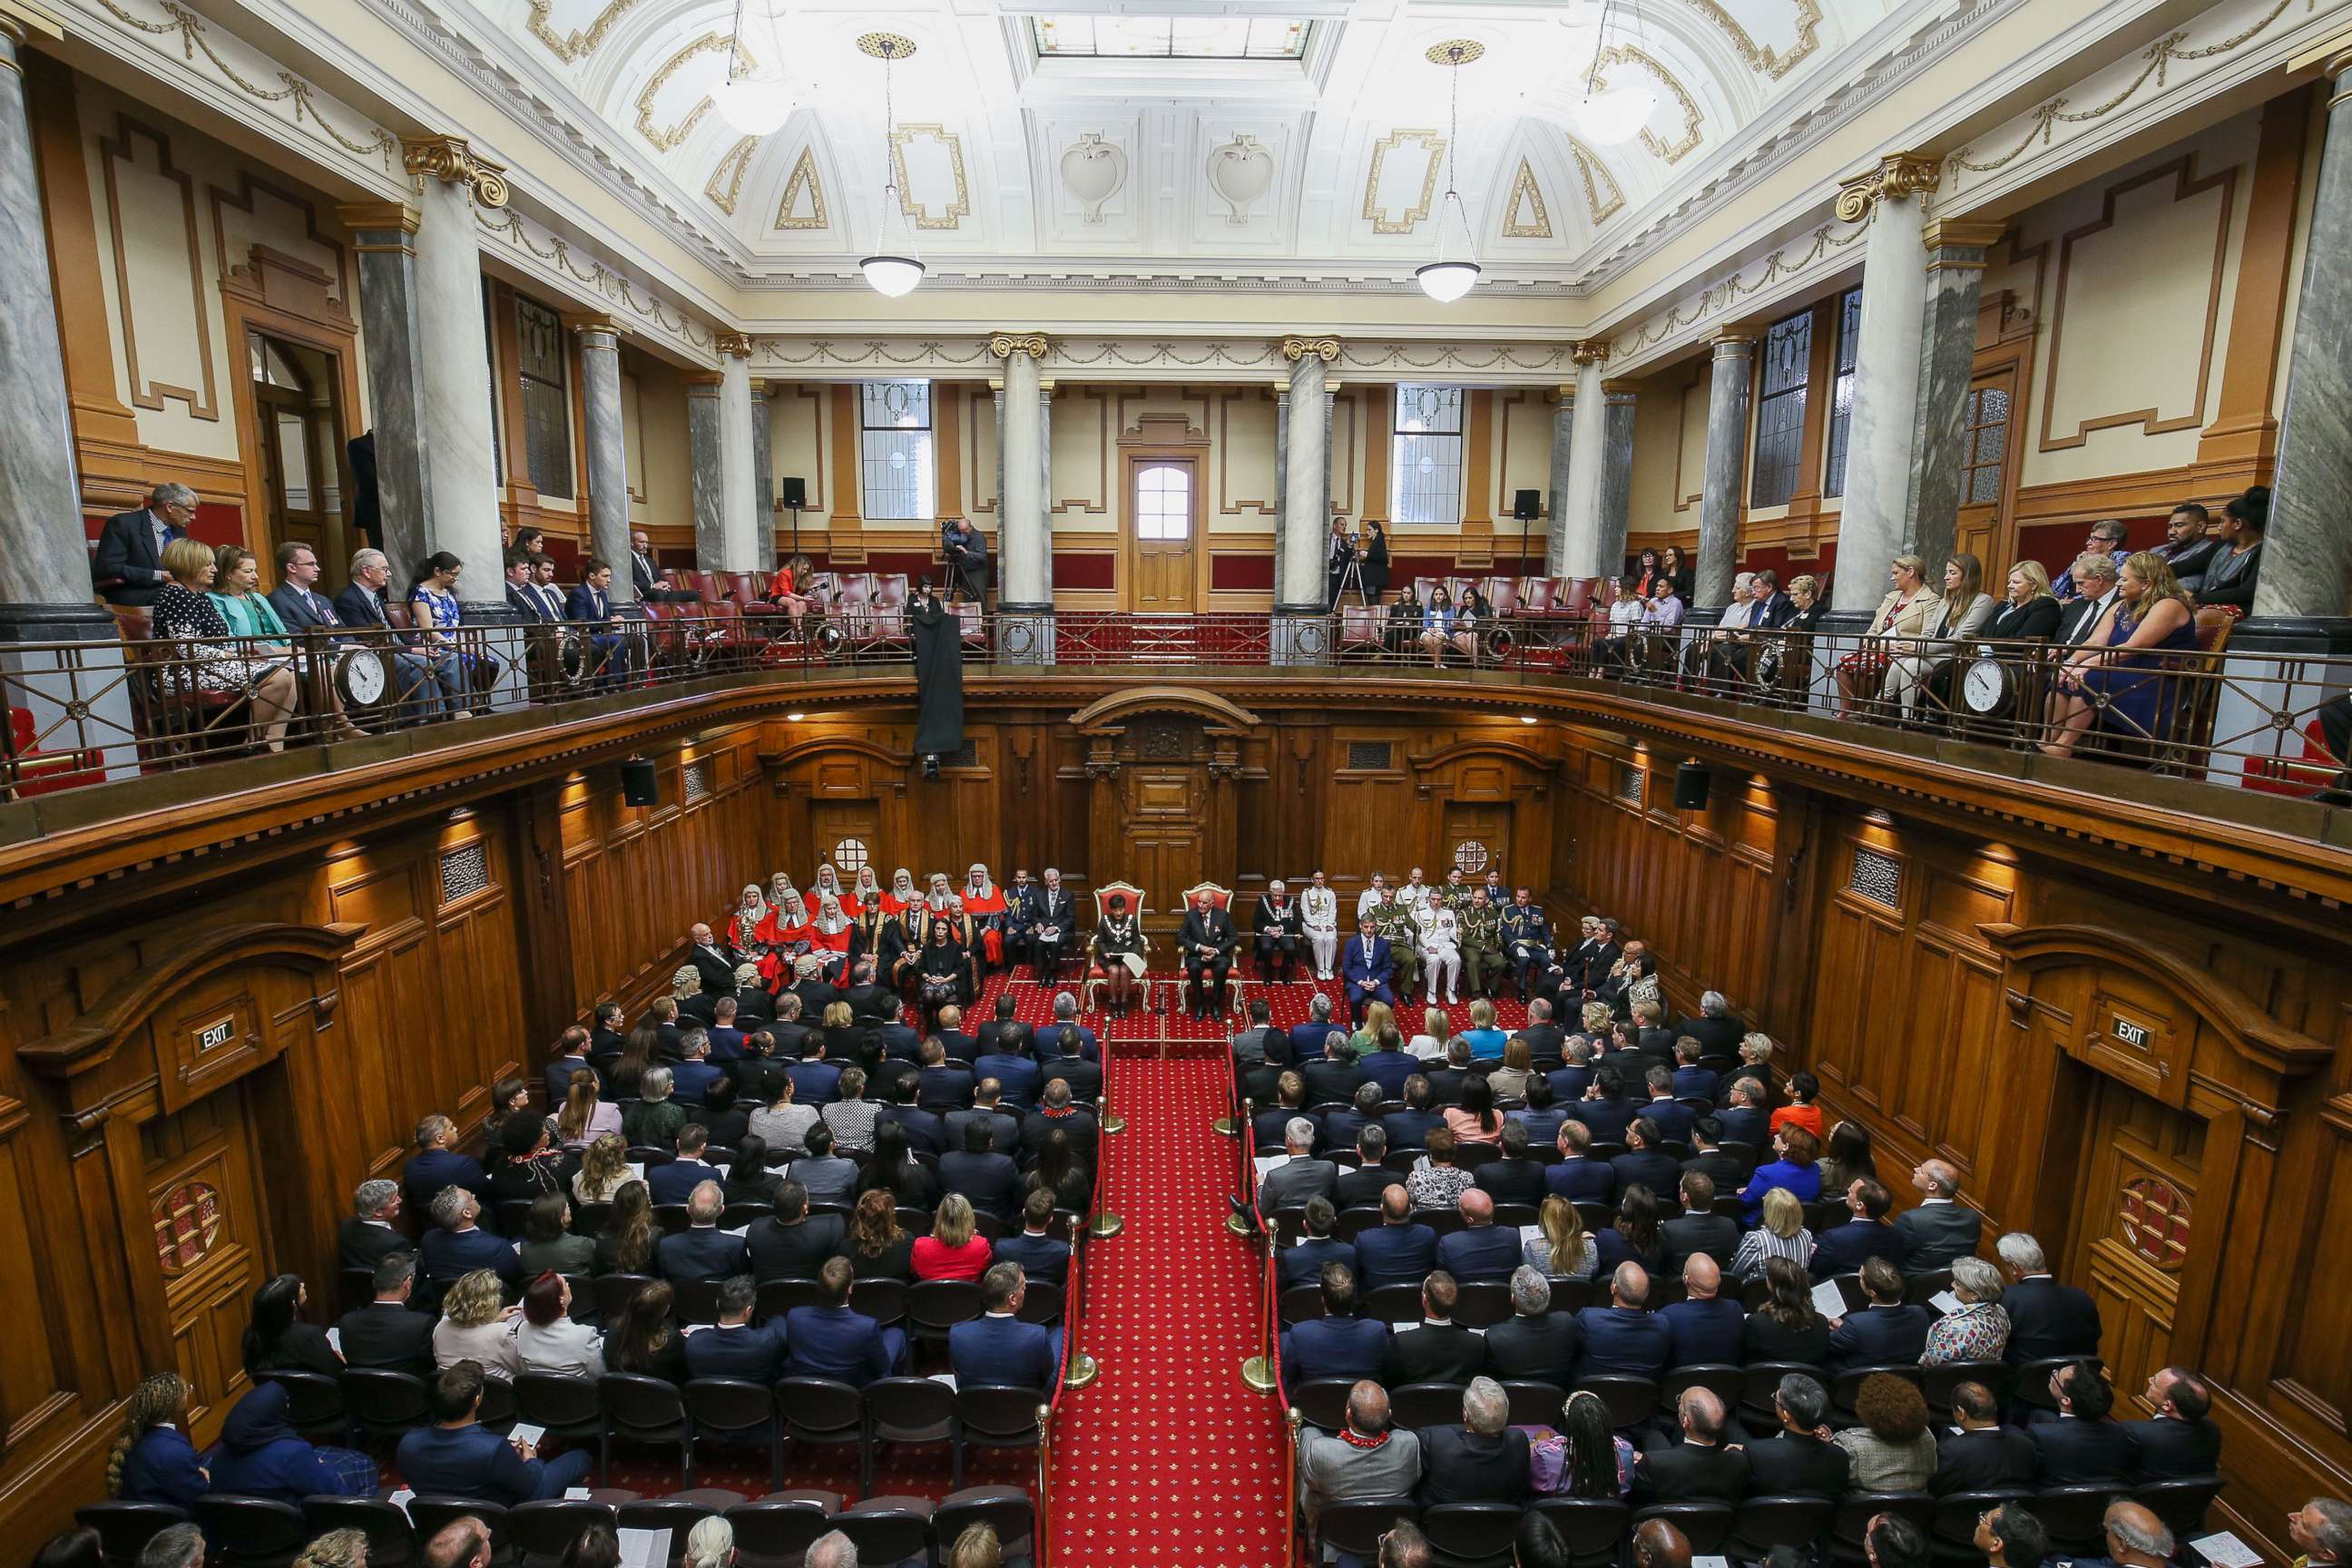 PHOTO: A general view of the Legislative Council Chamber during the State Opening of Parliament on Nov. 8, 2017 in Wellington, New Zealand.